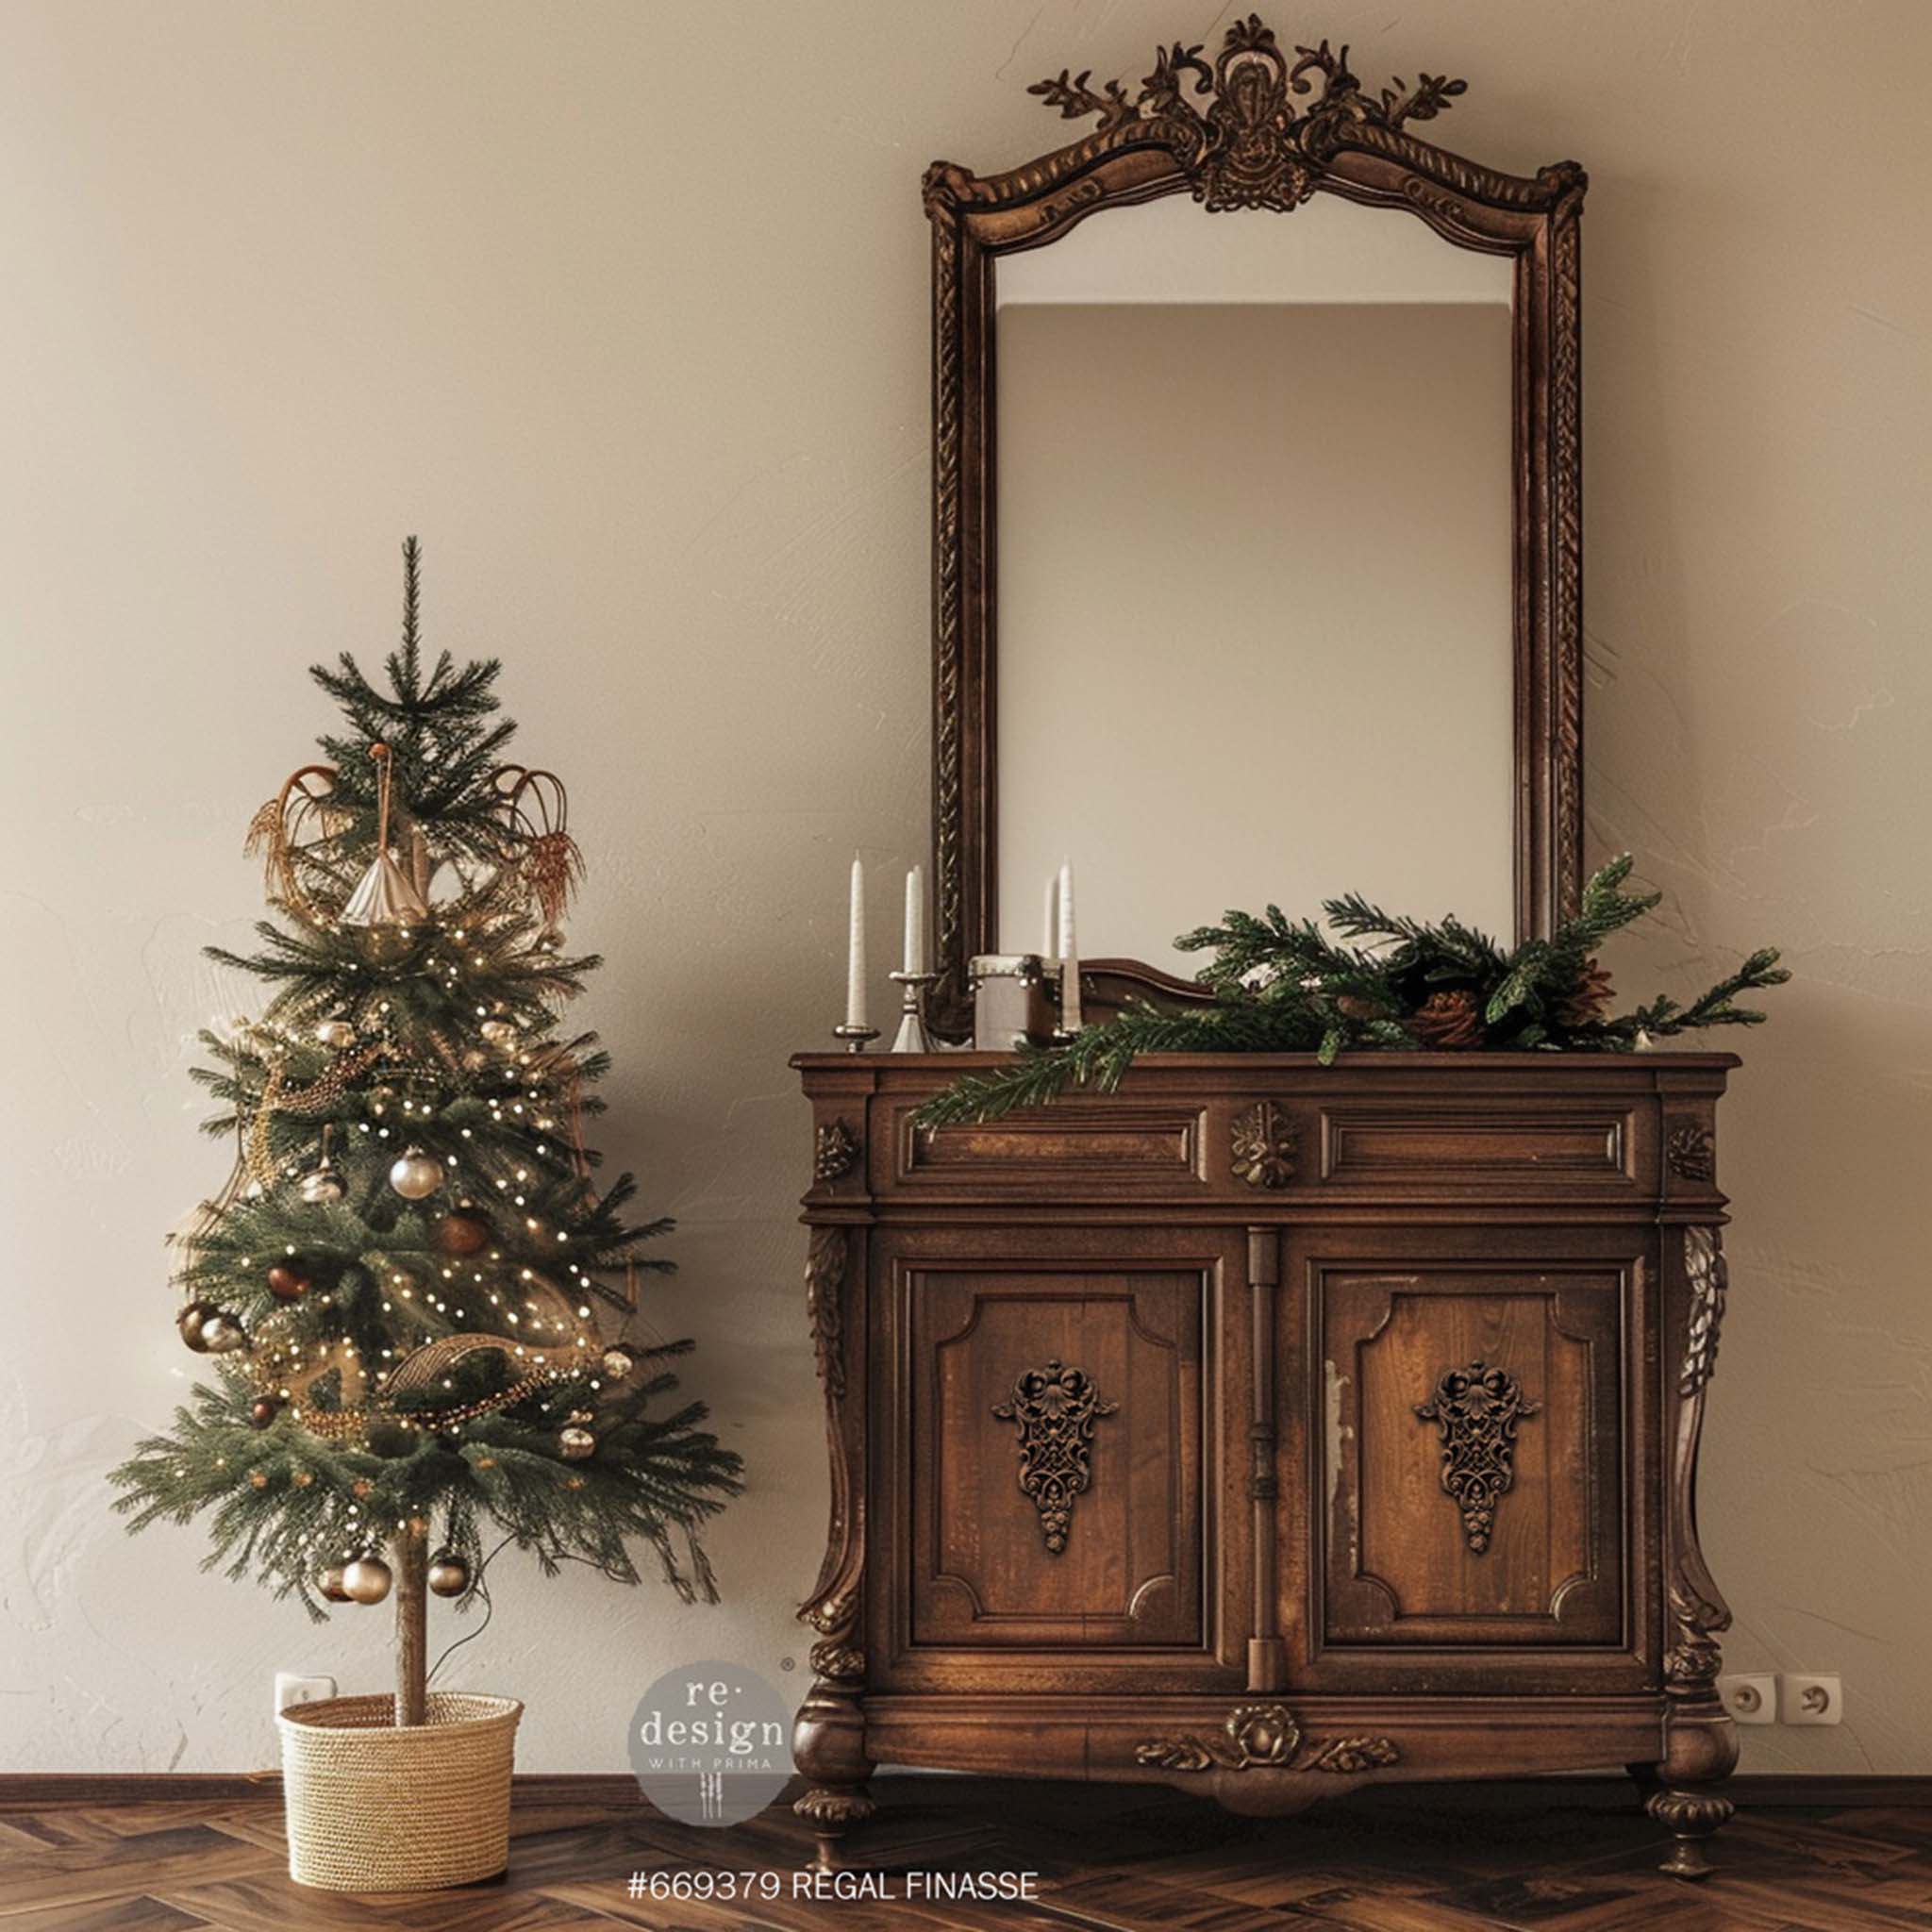 A vintage 2 door console cabinet with a large mirror is natural wood and features ReDesign with Prima's Regal Finasse Decor Poly Casting in the center of its 2 doors.